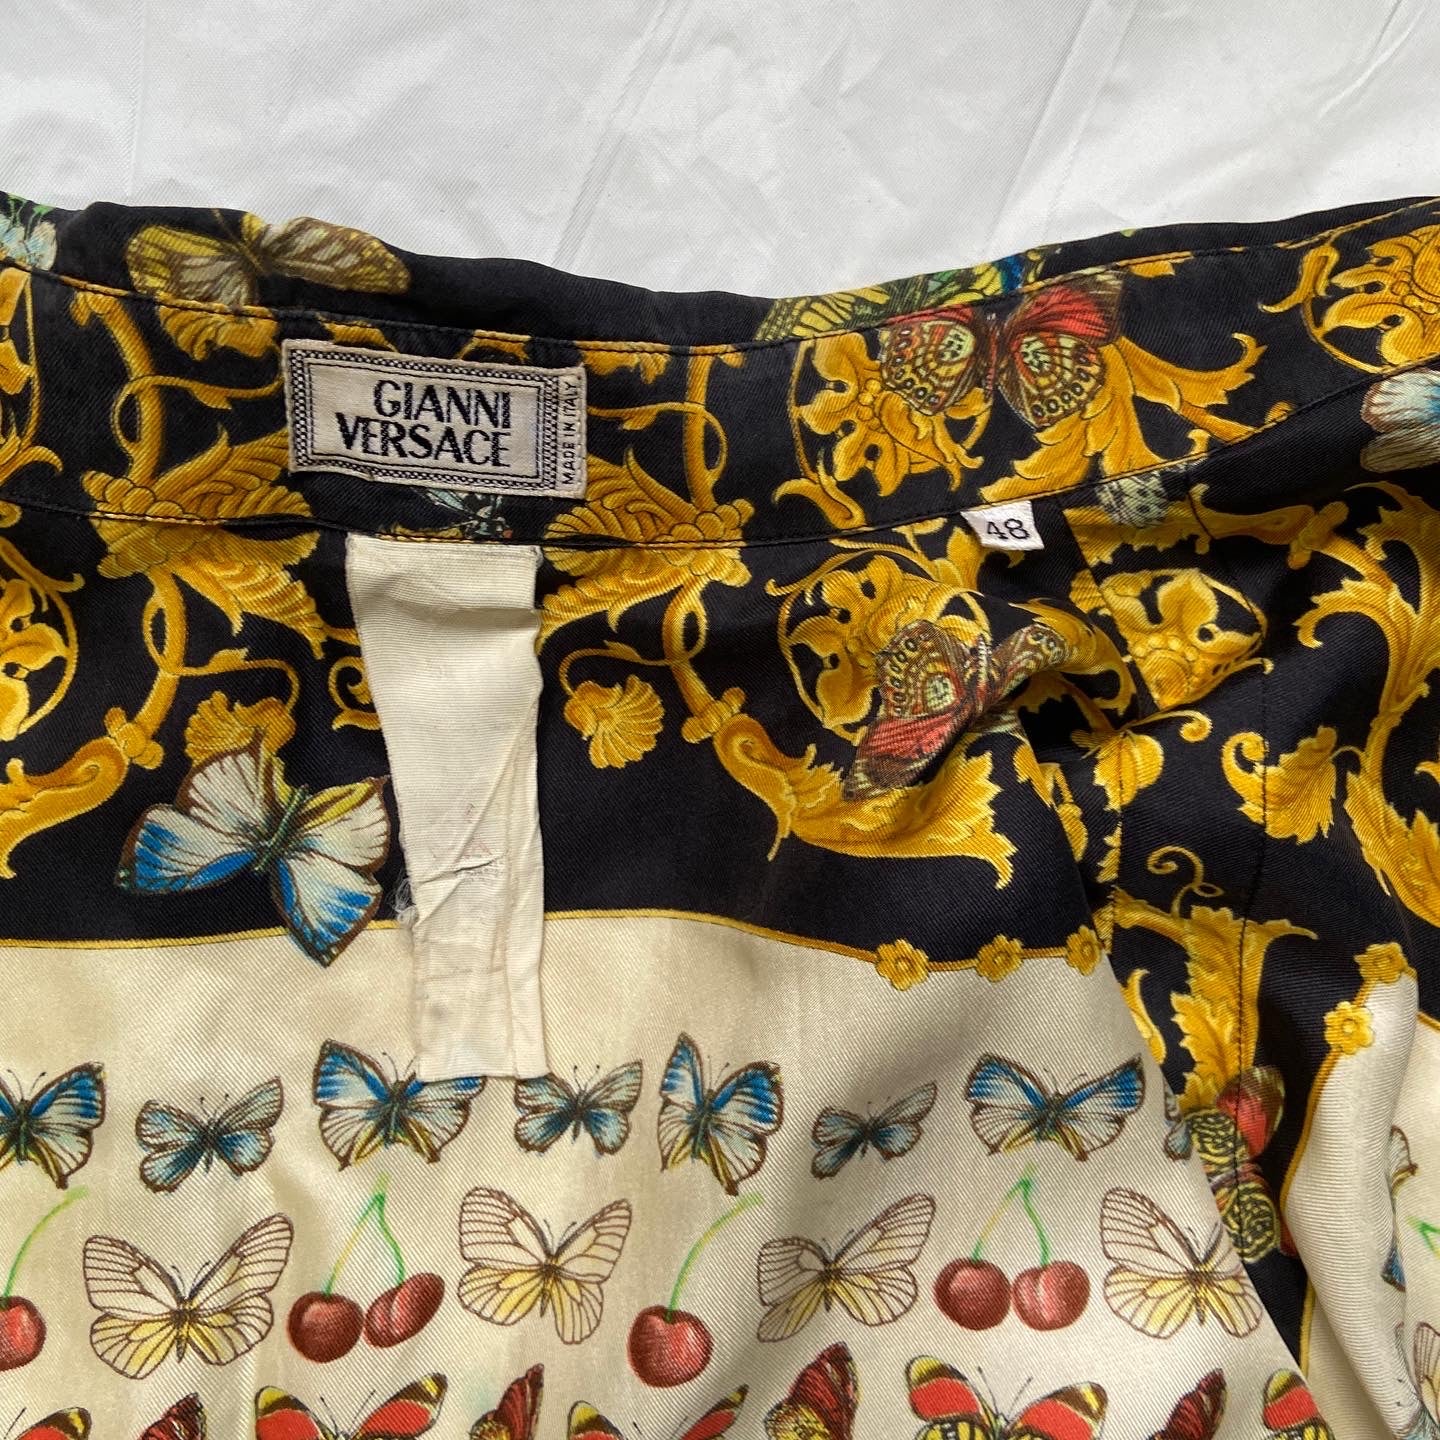 Gianni versace ss1995 butterfly print silk shirt – Dusty Archive